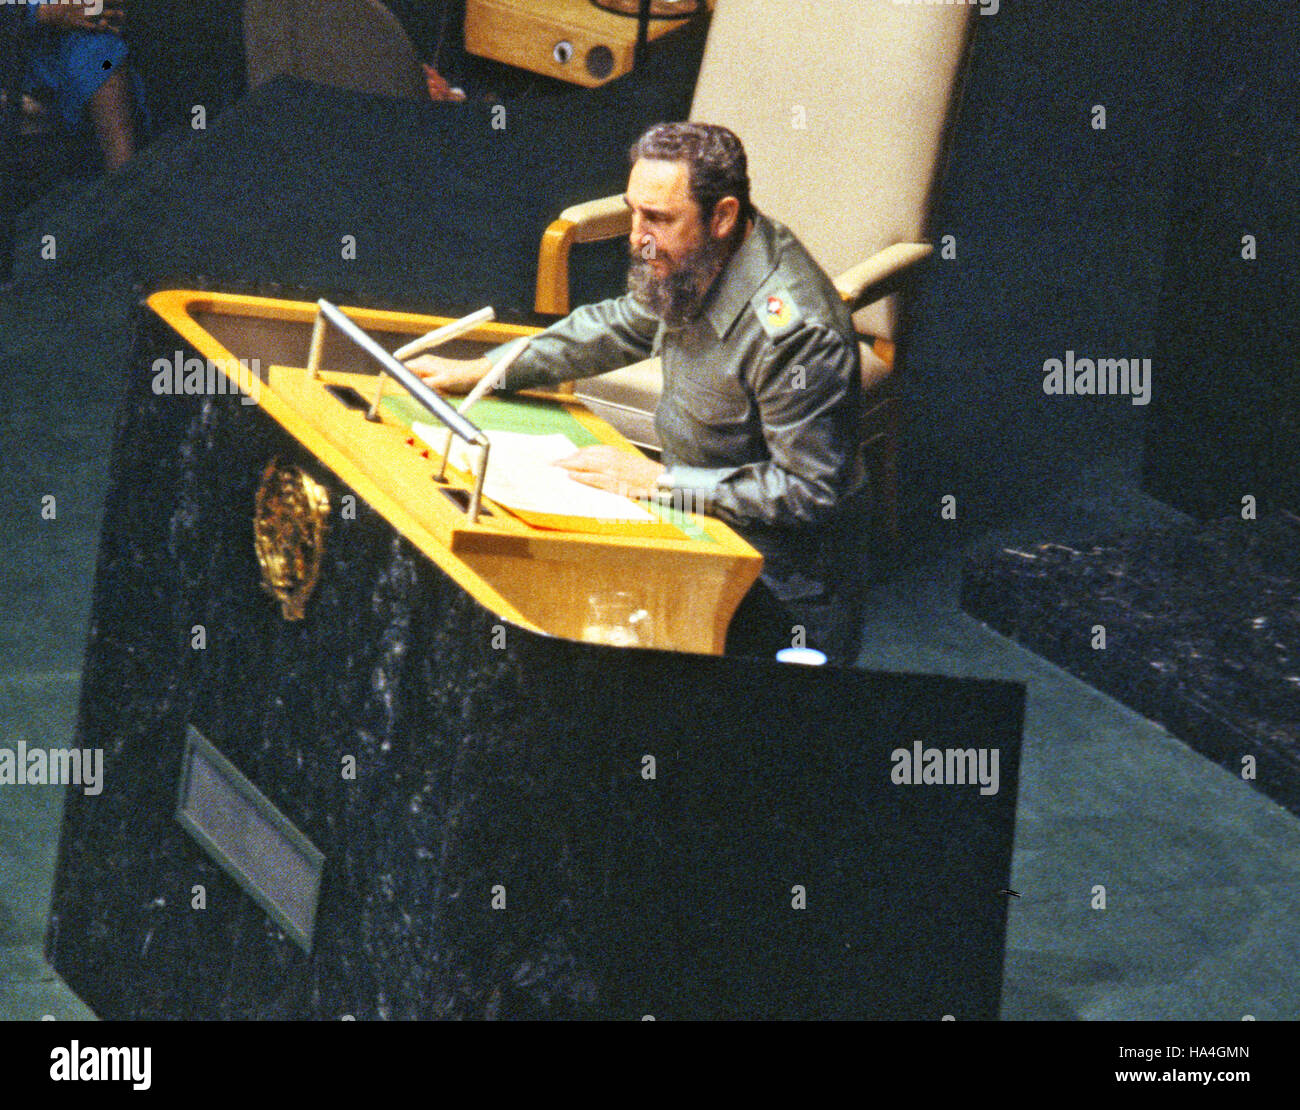 President Fidel Castro of Cuba addresses the United Nations General Assembly in New York, New York on October 15, 1979. Castro's speech discussed the disparity between the world·s rich and the world's poor.  - NO WIRE SERVICE- Photo: Arnie Sachs/Consolidated/dpa Stock Photo